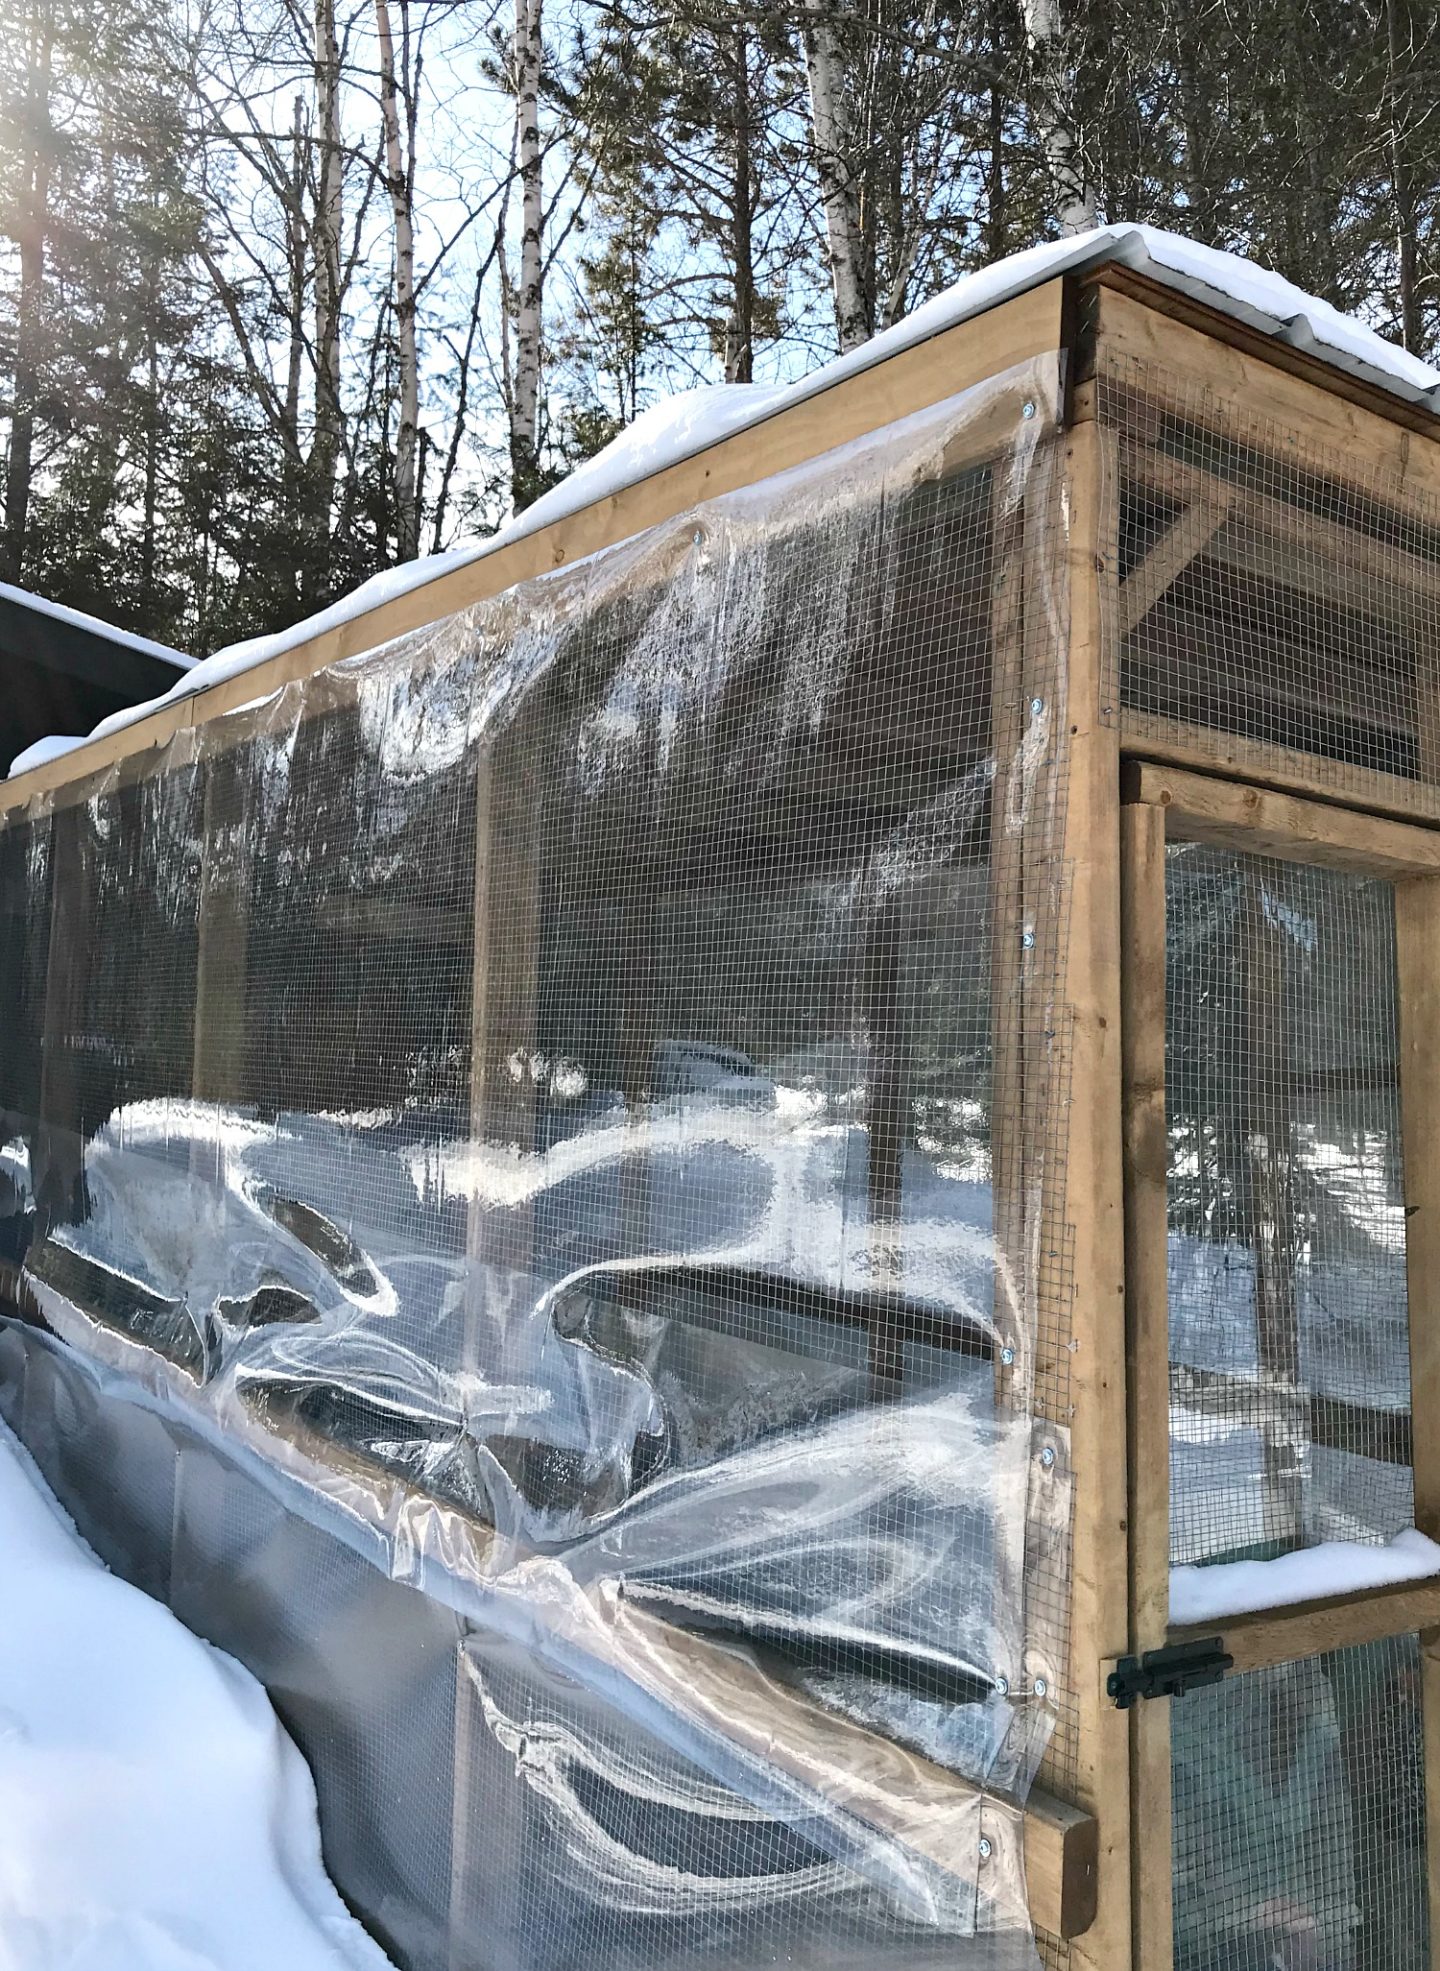 How We Keep Chickens Warm in Extreme Cold Winter Weather